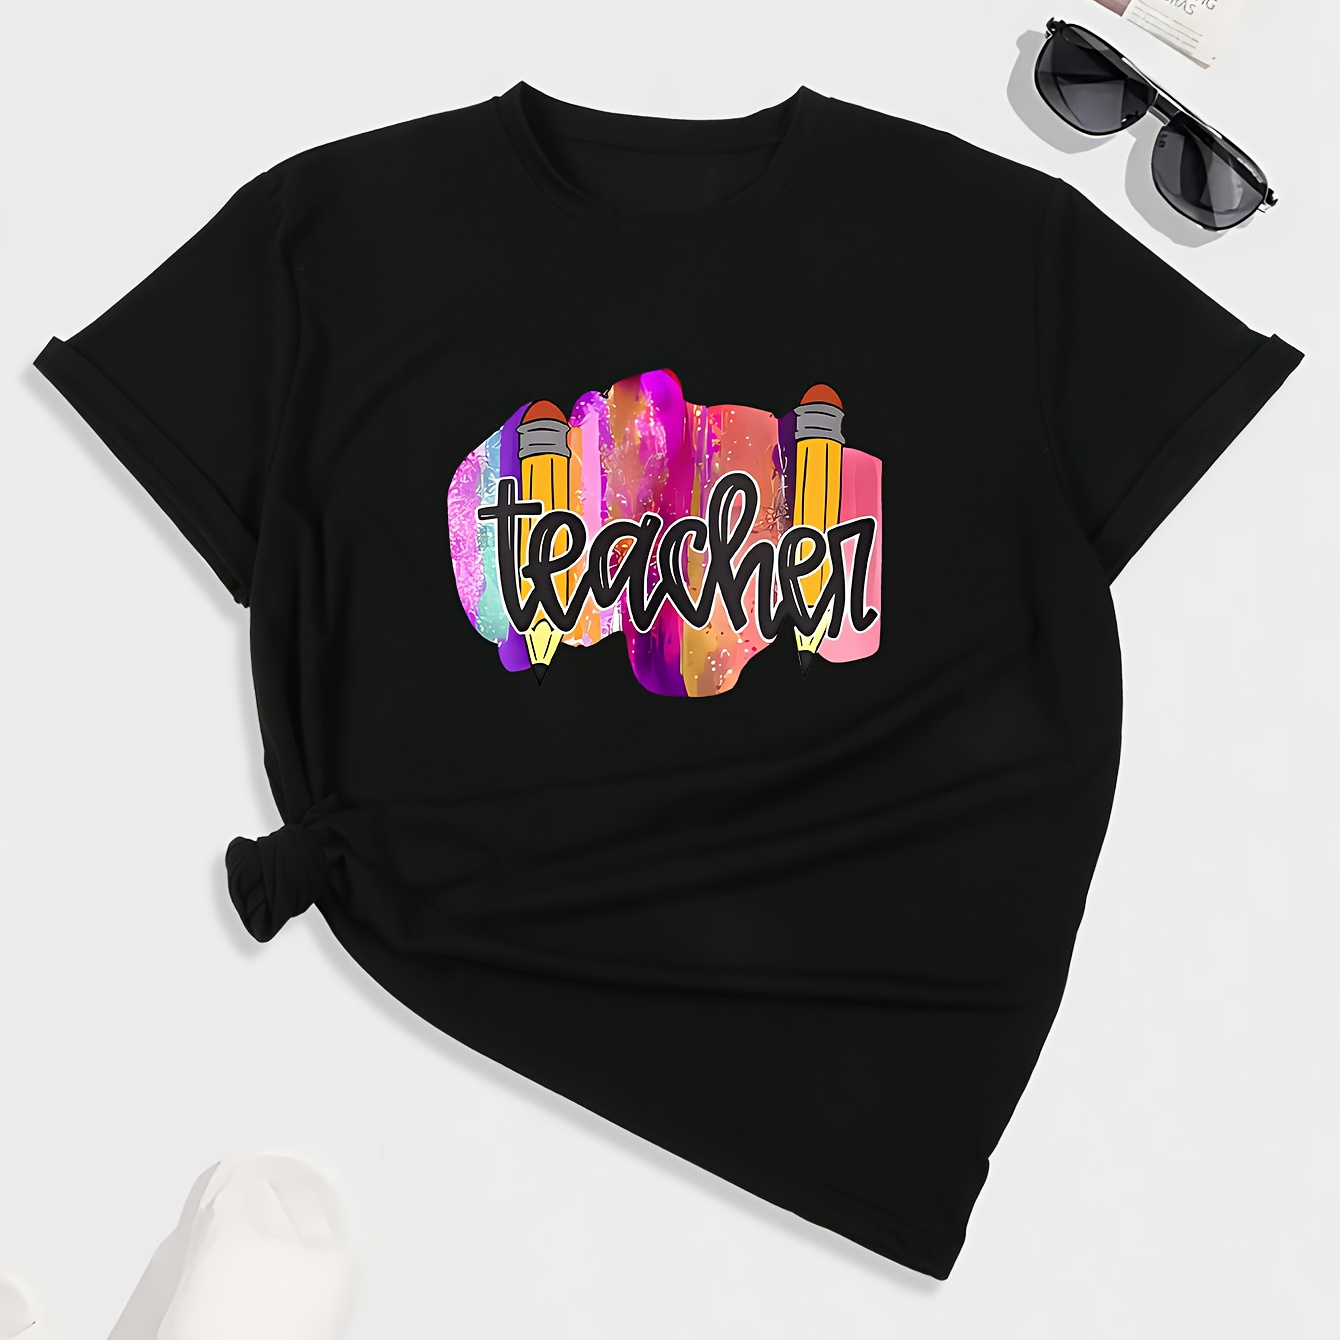 

Women's Short Sleeve T-shirt, With Colorful Pencil Letter "teacher" Print, Comfort Fit, Round Neck Fashion Top